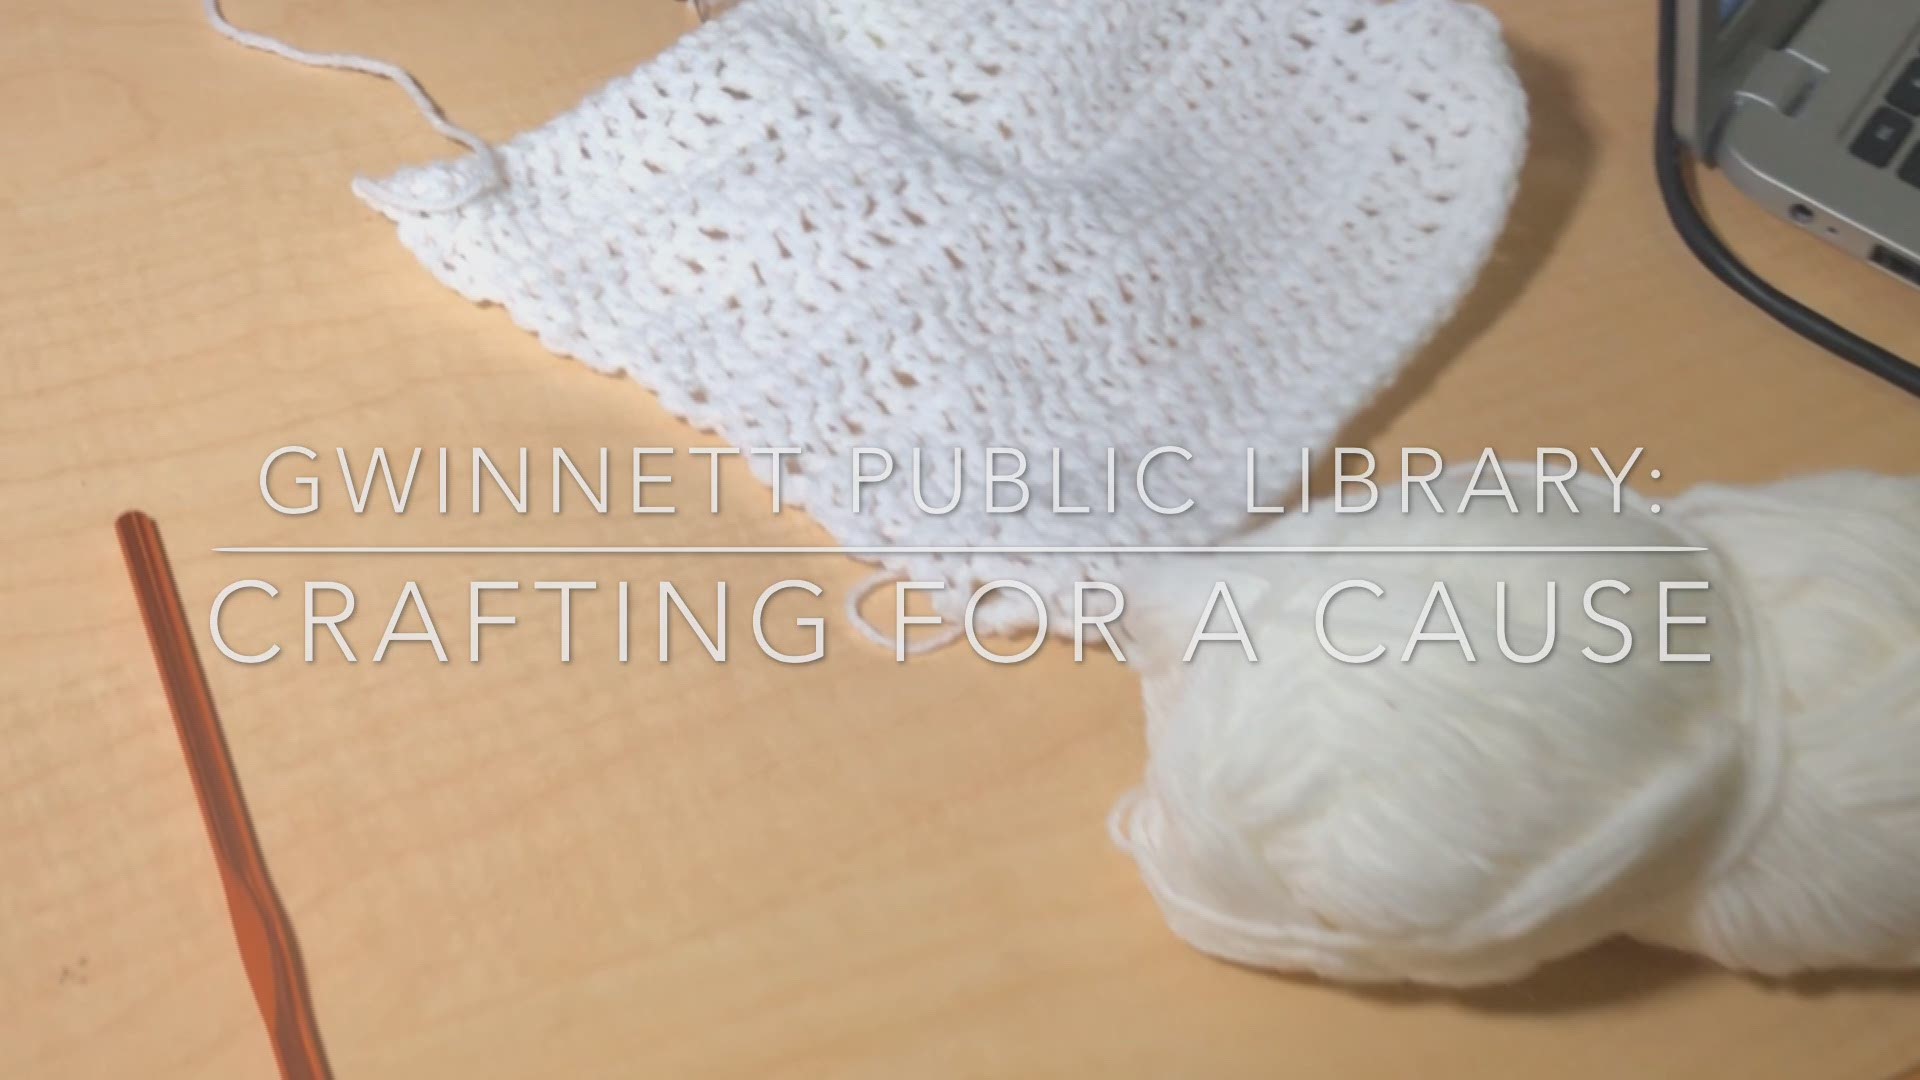 Video of crafting for a cause at Gwinnett Public Library.